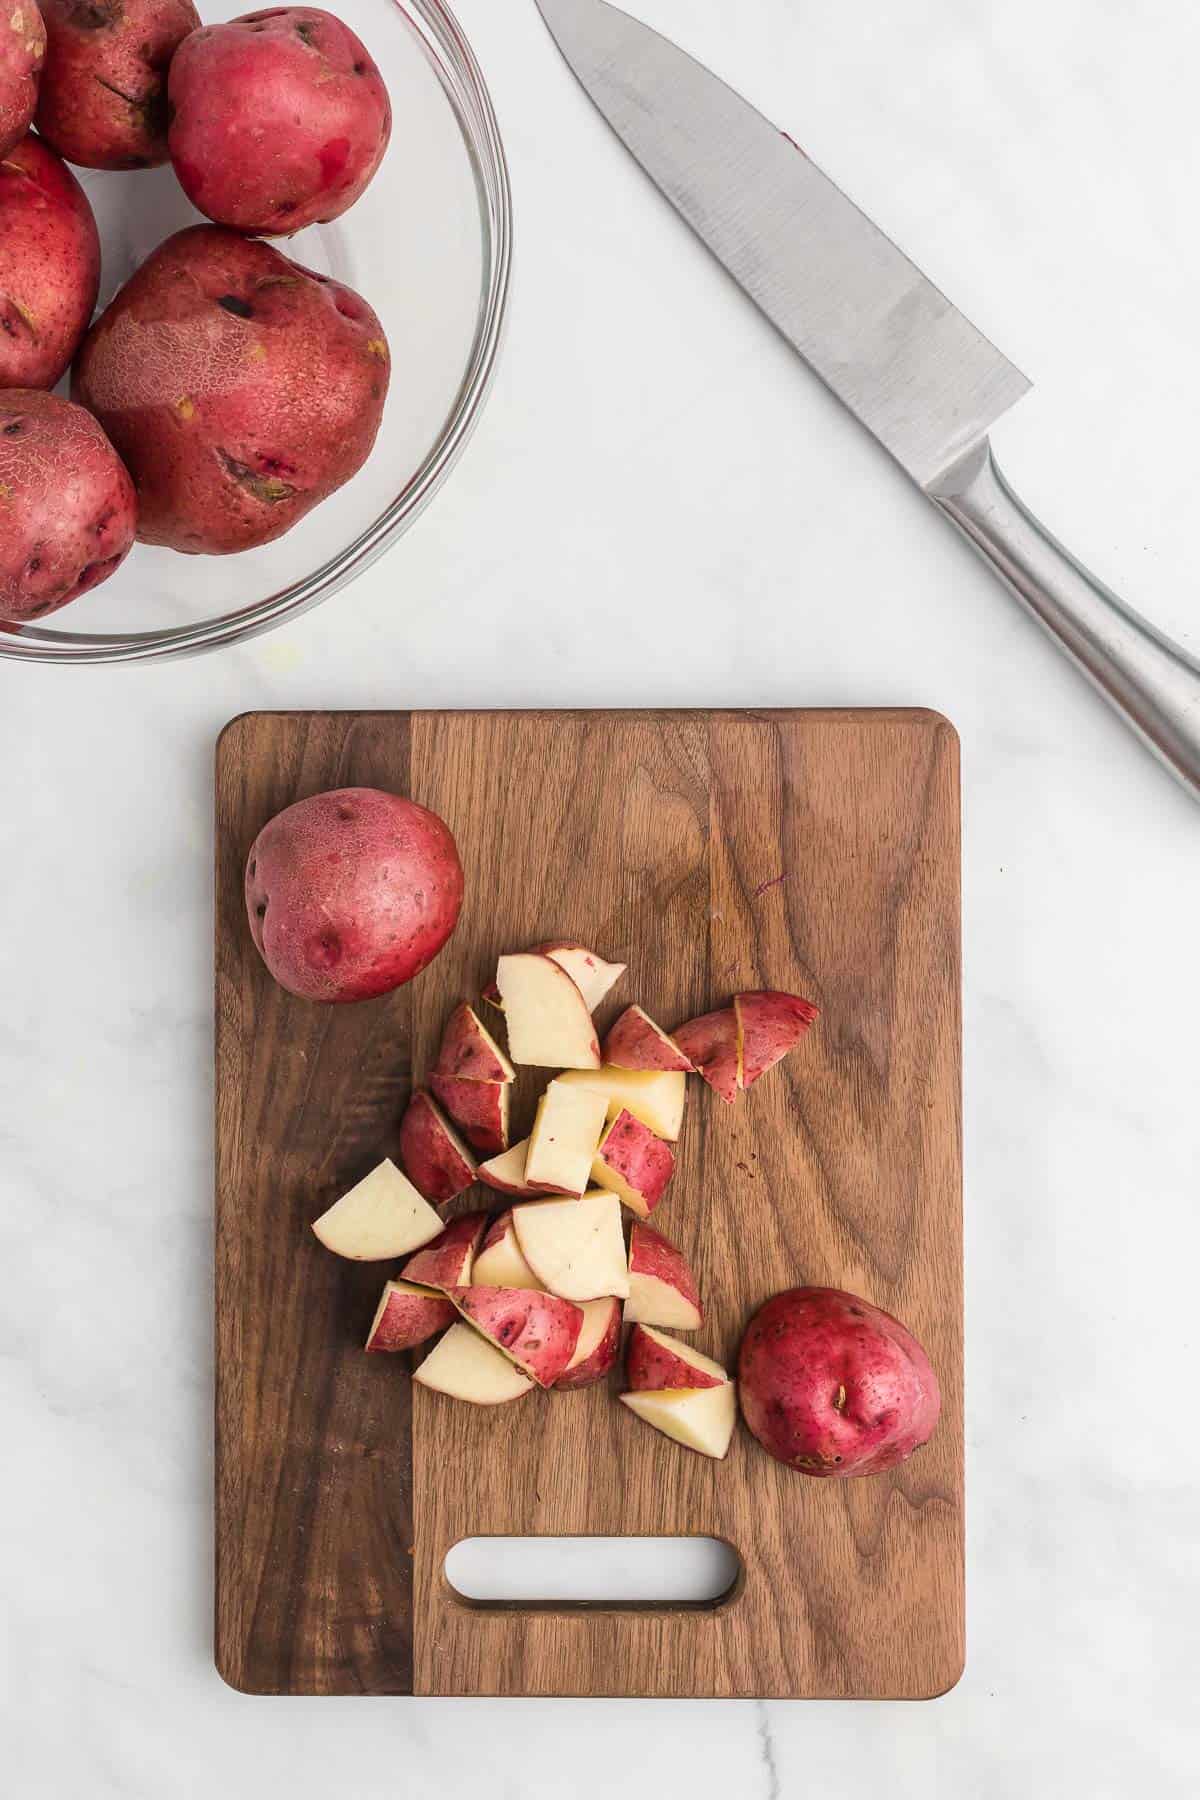 cutting red potatoes into chunks on a cutting board